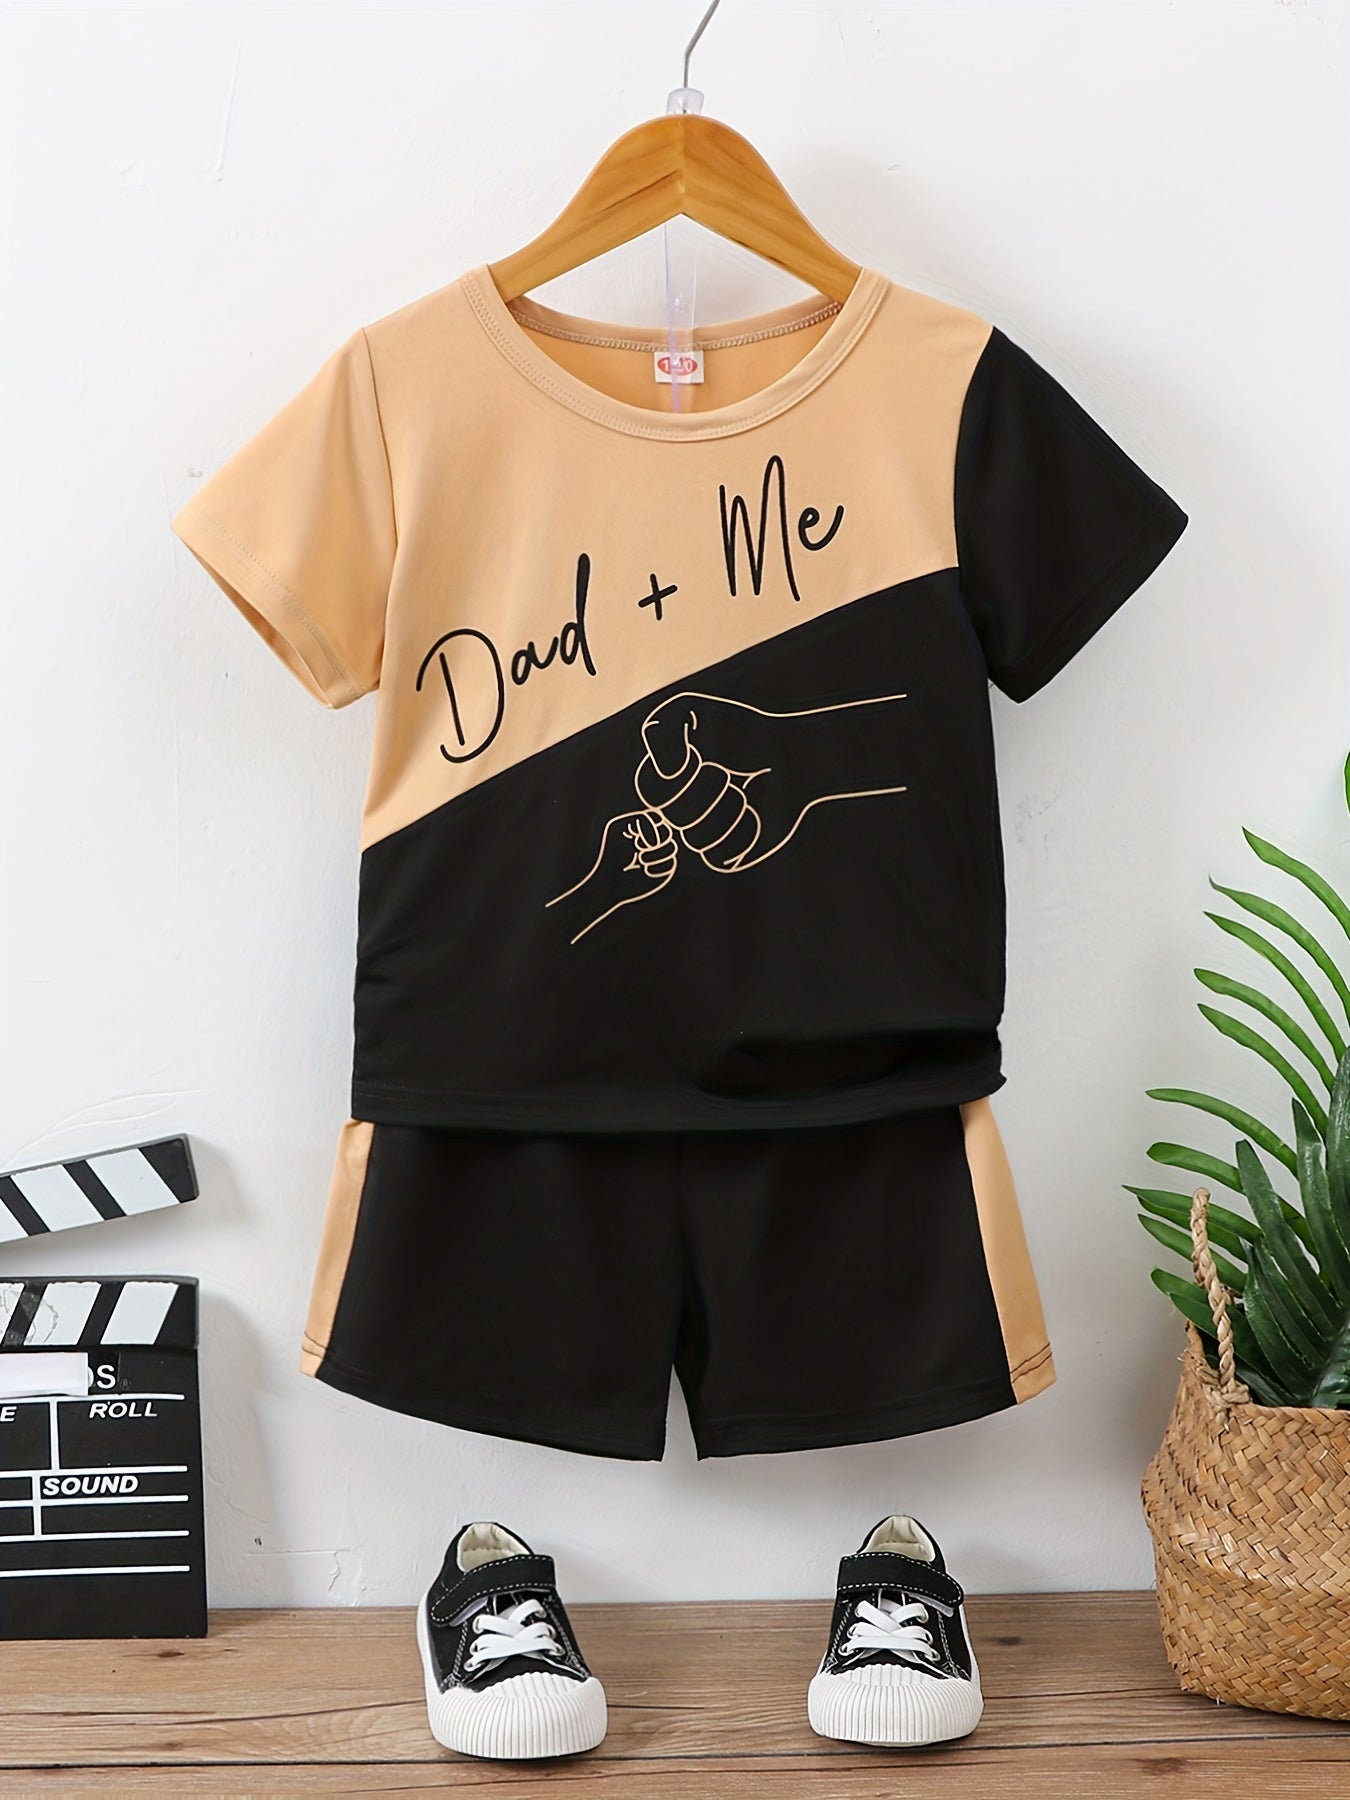 Boys "Daddy + Me" Fists Print Color Block Casual Outfit Round Neck T-shirt & Shorts Kids Summer Clothes Sets